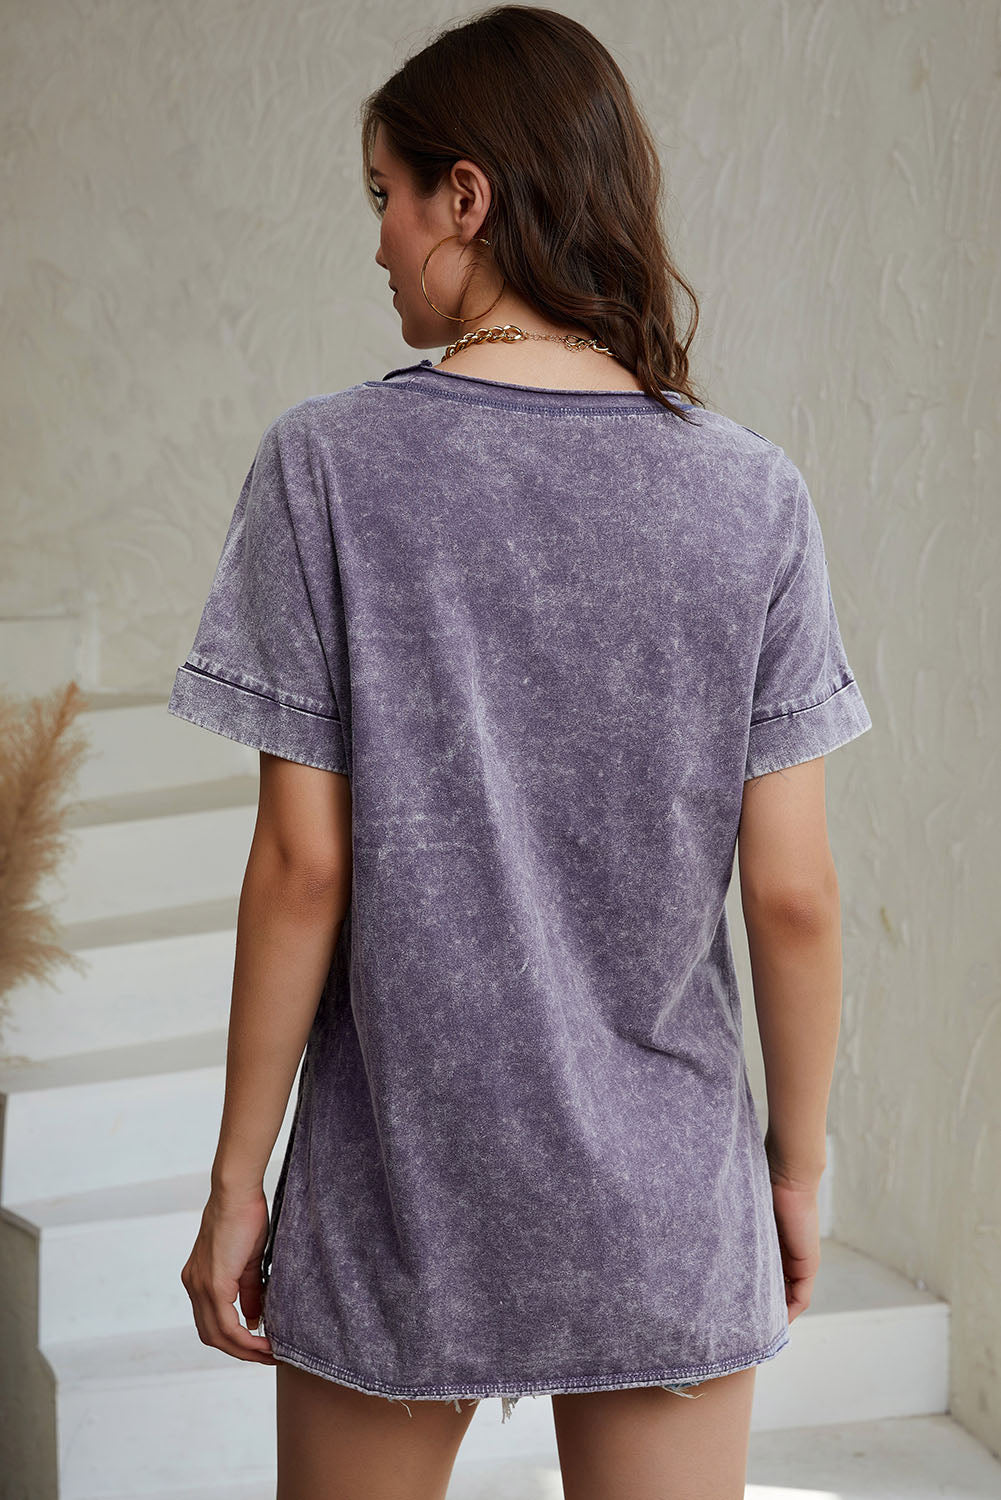 Mineral Wash Round Neck Short Sleeve Blouse - Online Only